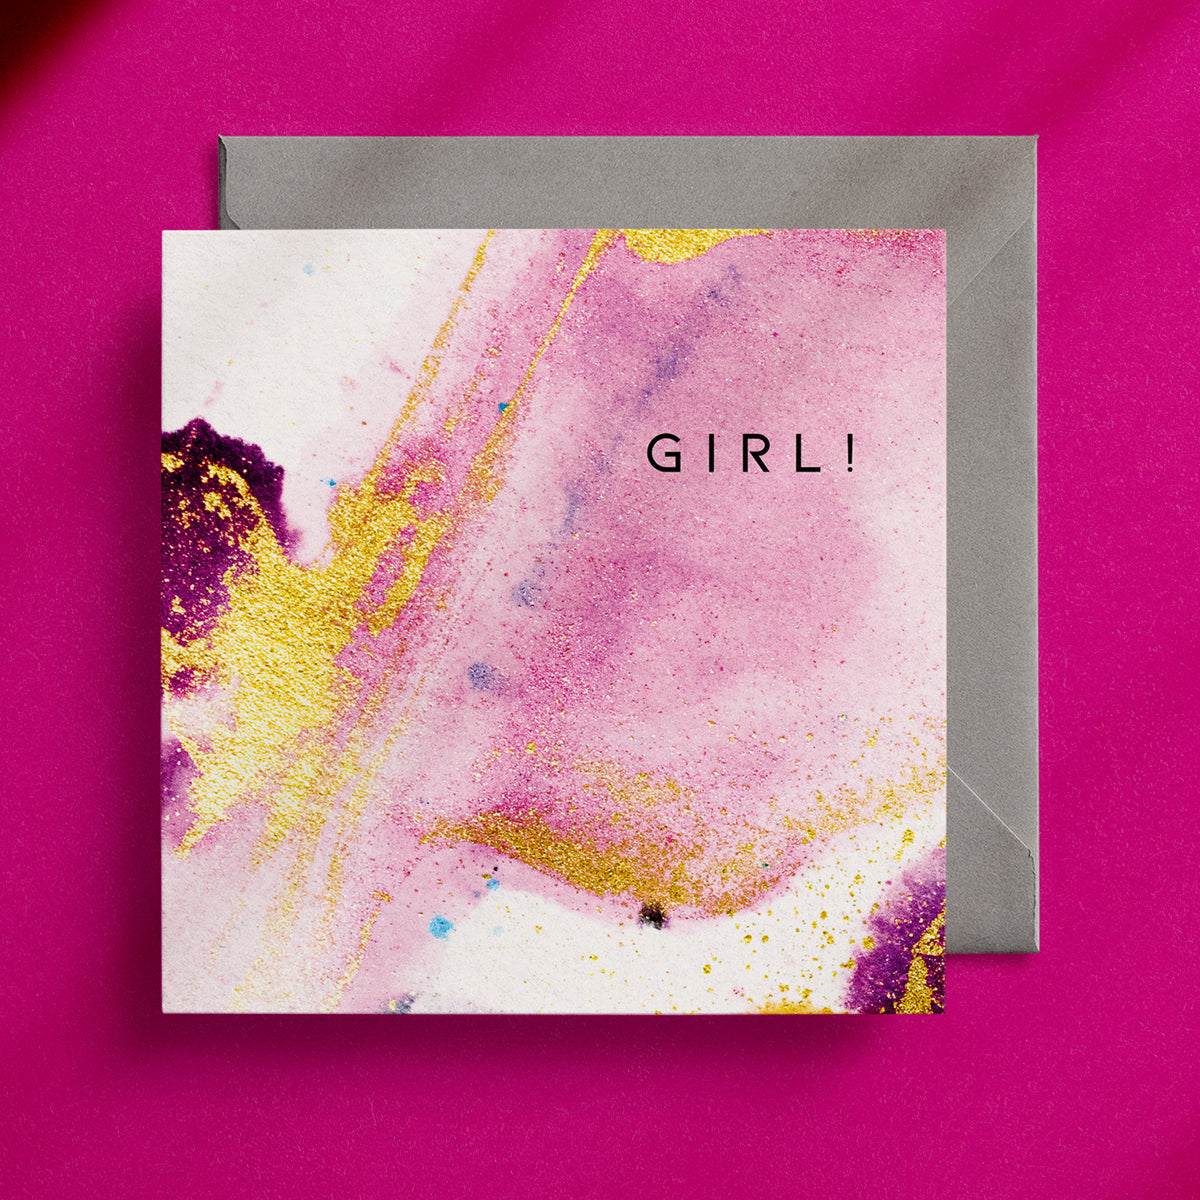 Feminine, pink and gold greeting card with an abstract design and the word "Girl!" in the top right corner